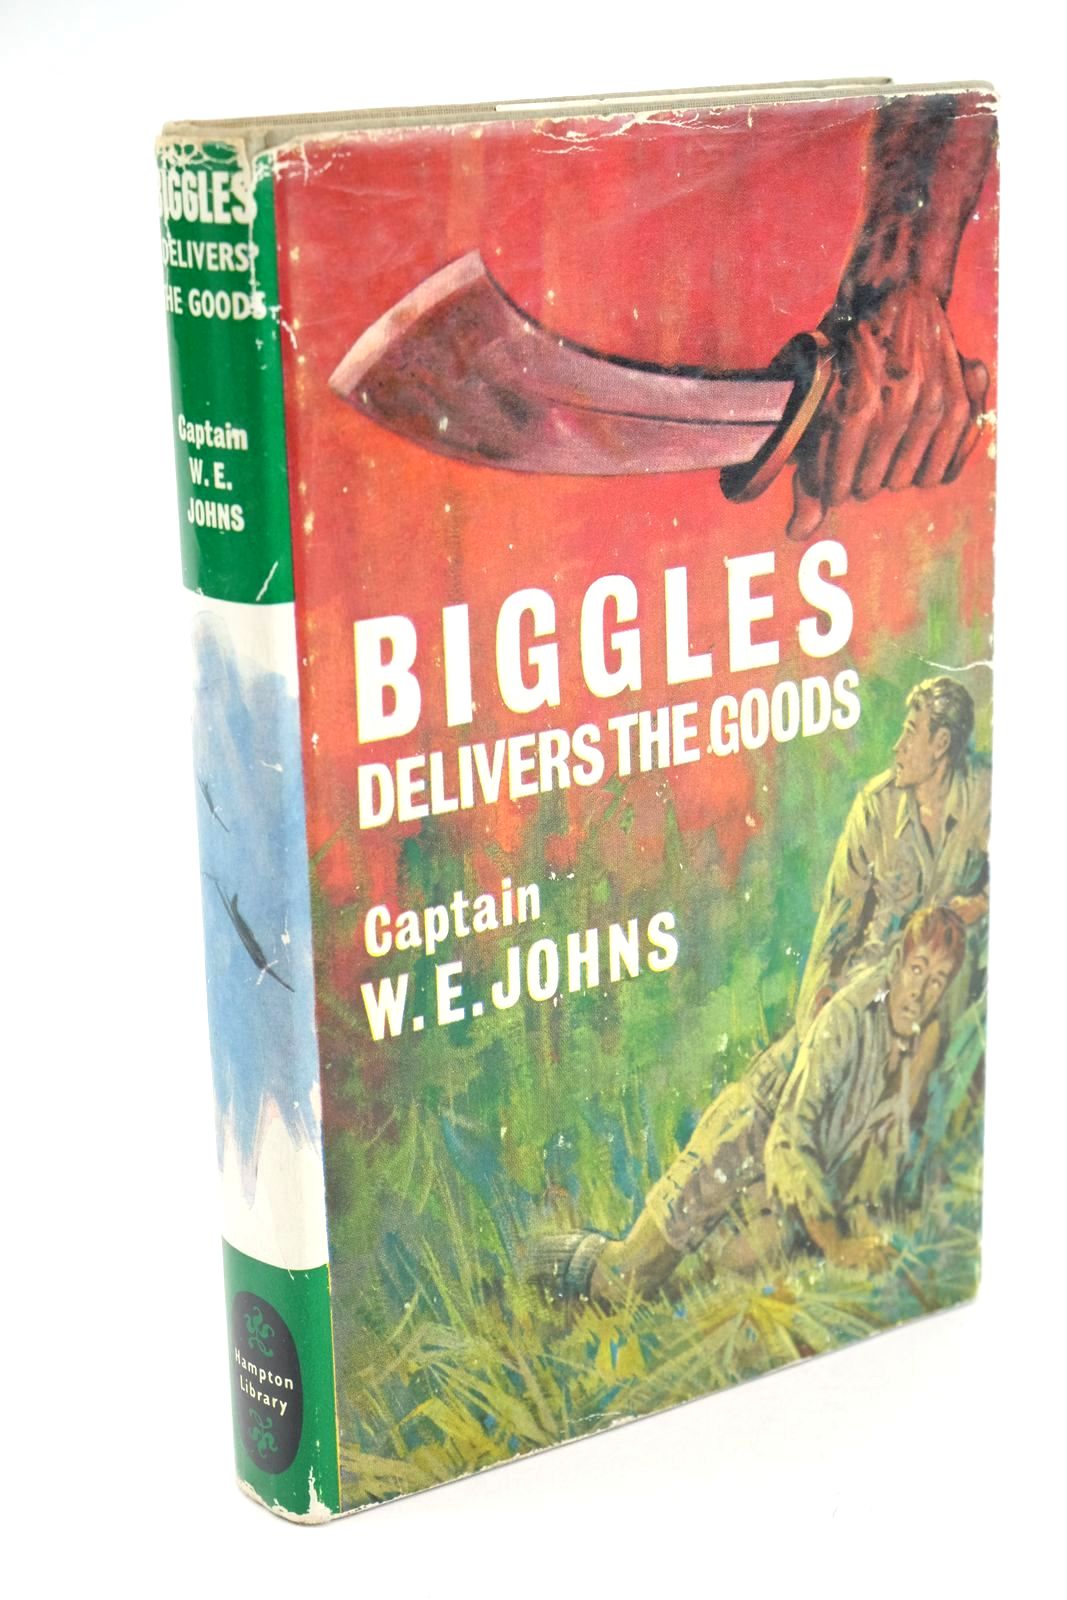 Photo of BIGGLES DELIVERS THE GOODS written by Johns, W.E. illustrated by Stead,  published by Hodder &amp; Stoughton (STOCK CODE: 1324853)  for sale by Stella & Rose's Books